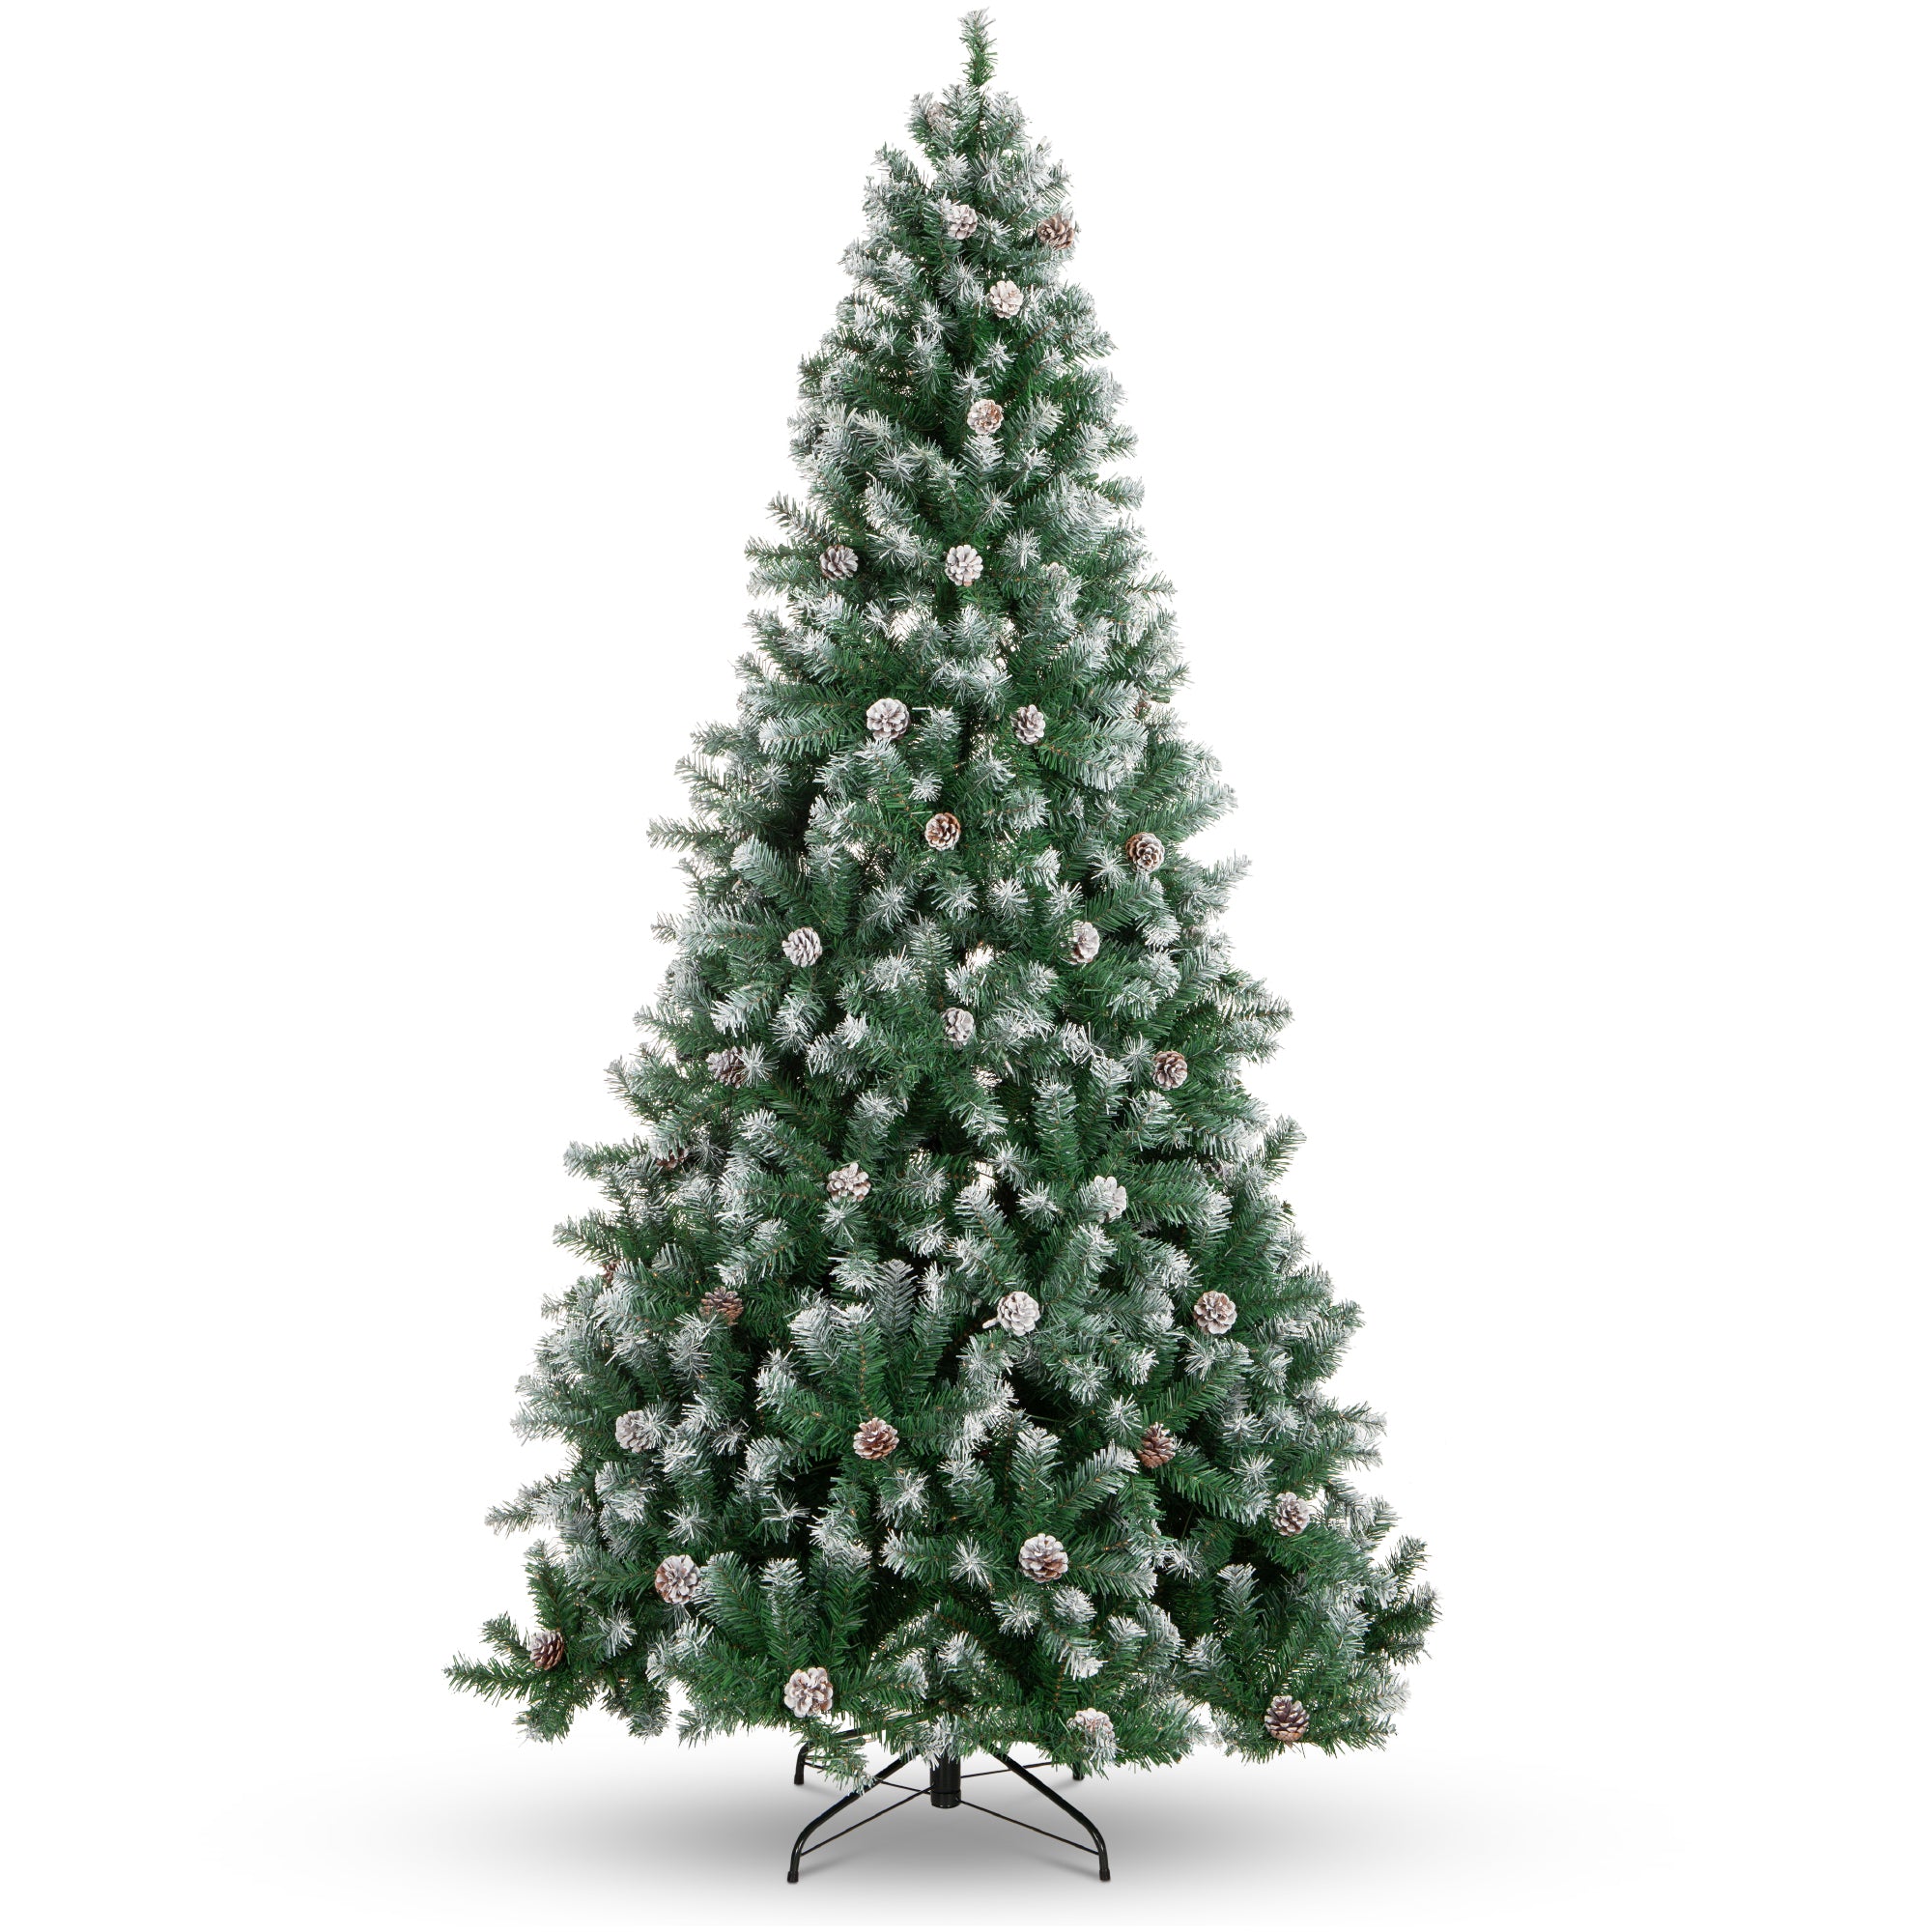 OASIS® Home & Hobby - Christmas Tree in a 60cm Cone 